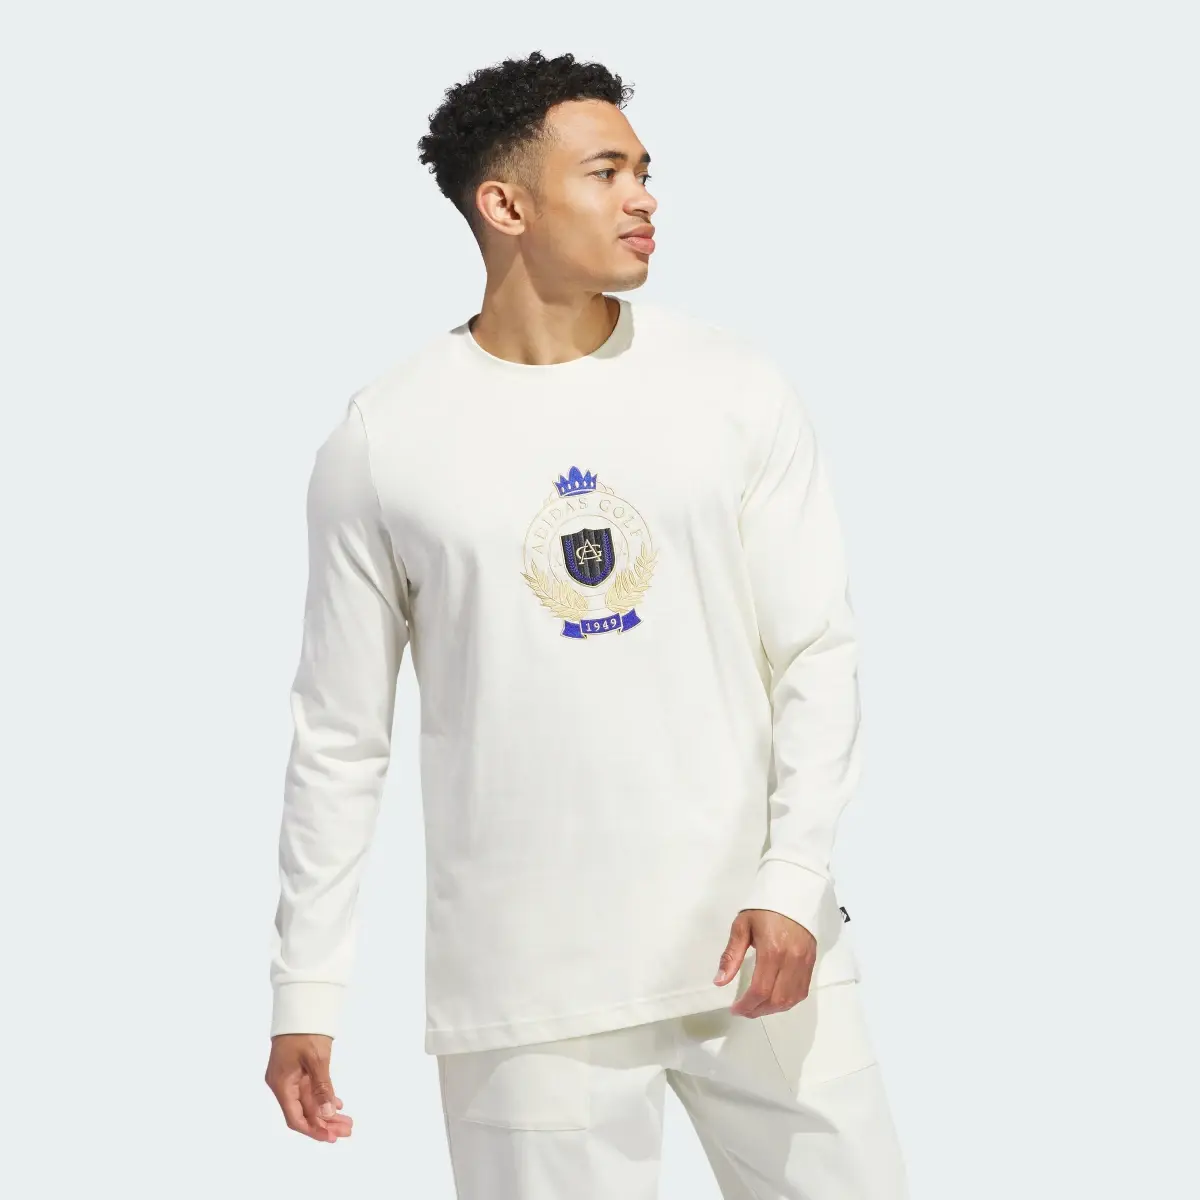 Adidas Go-To Crest Graphic Longsleeve. 2